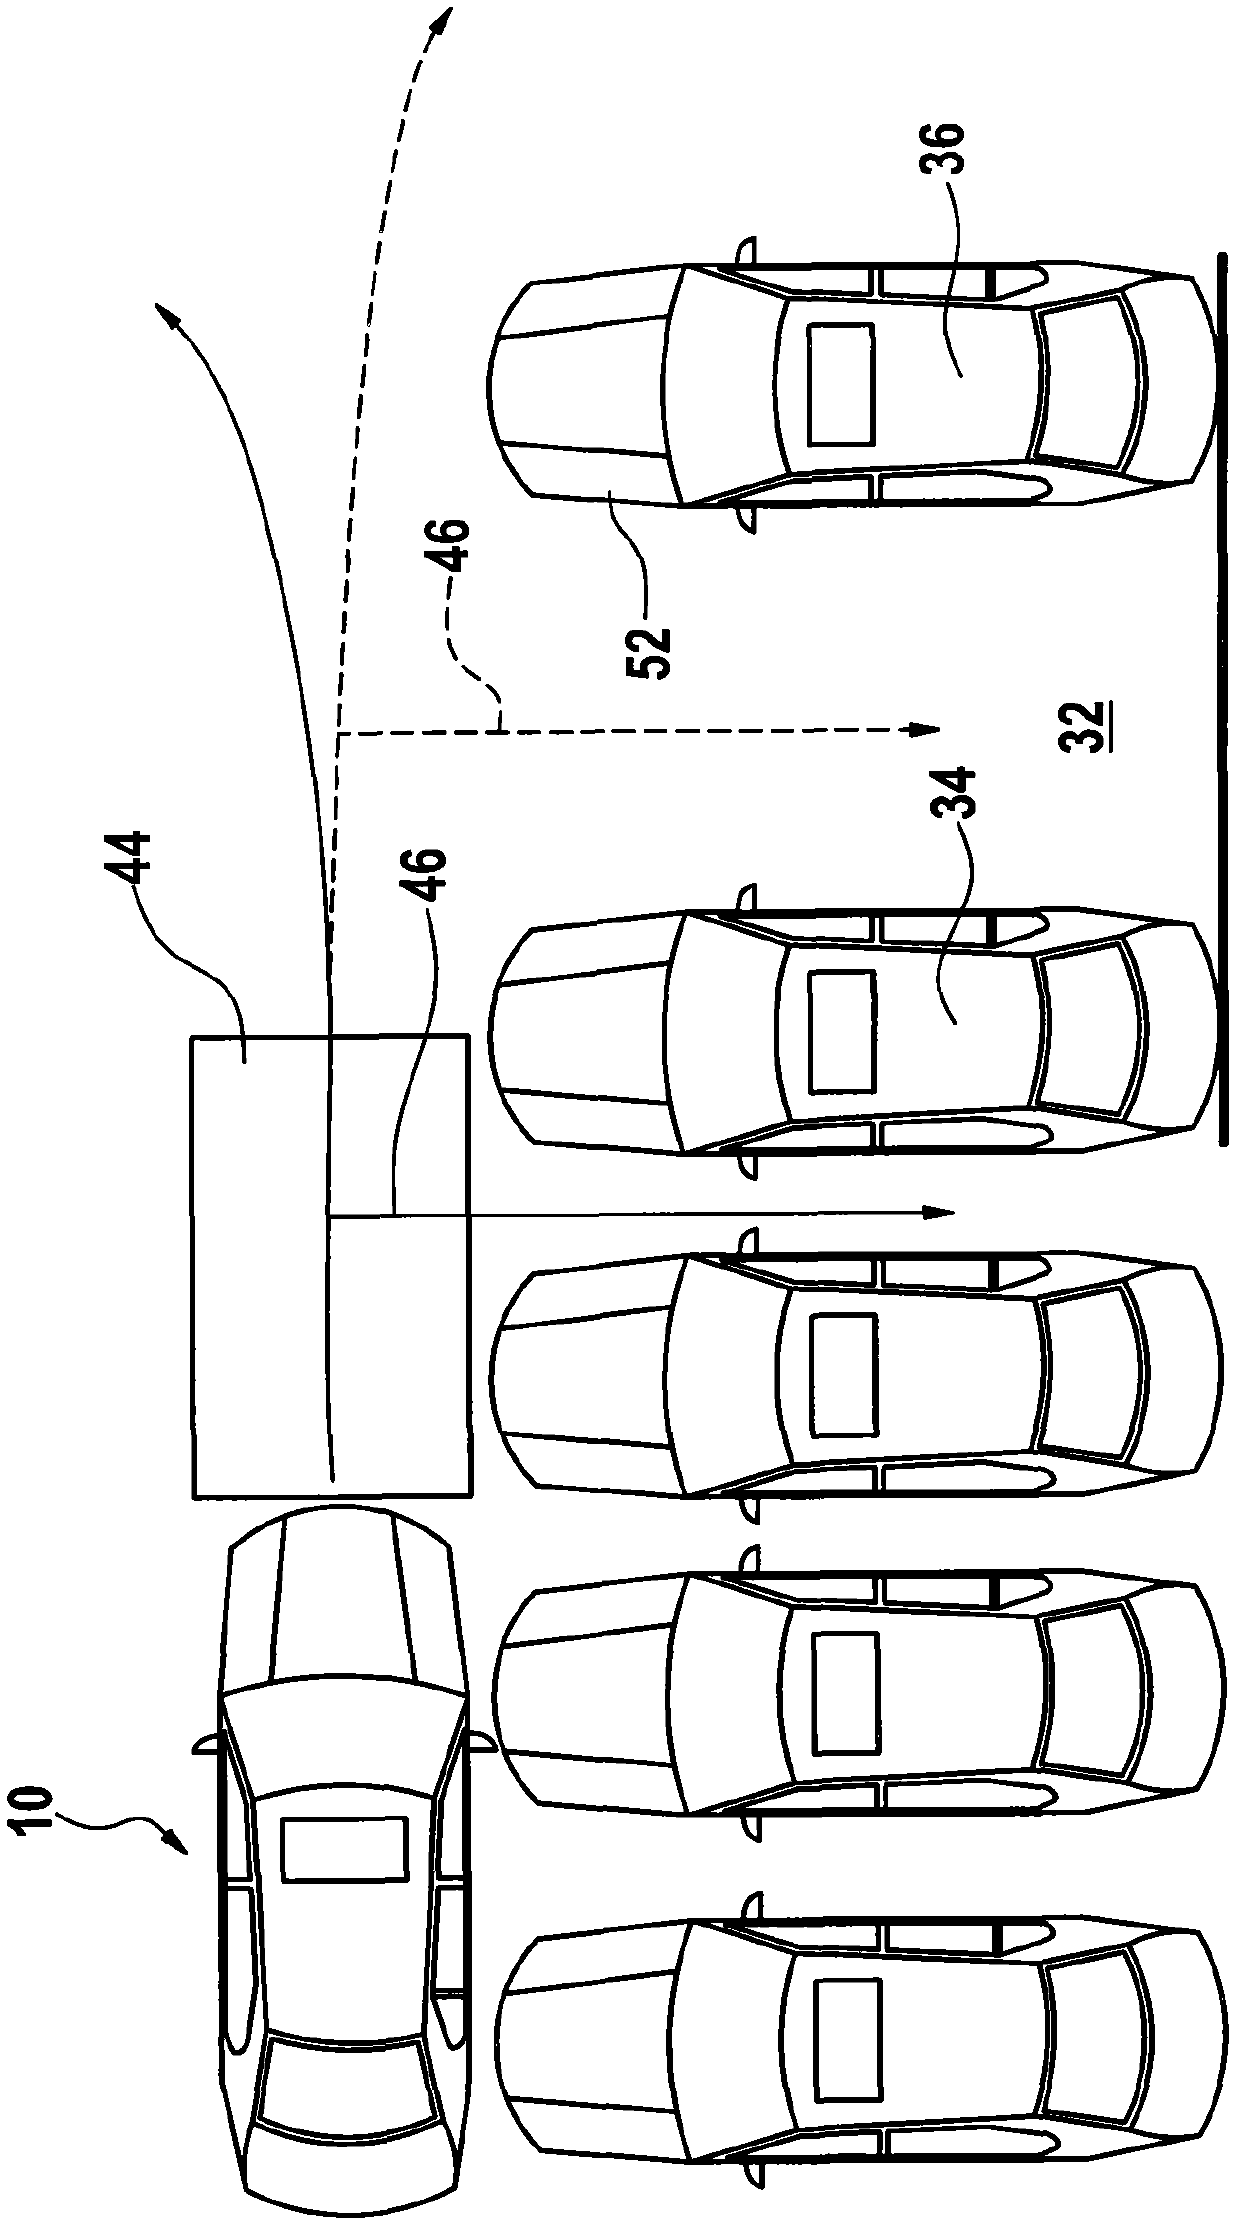 Object detection and motion evaluation method for identifying parking space